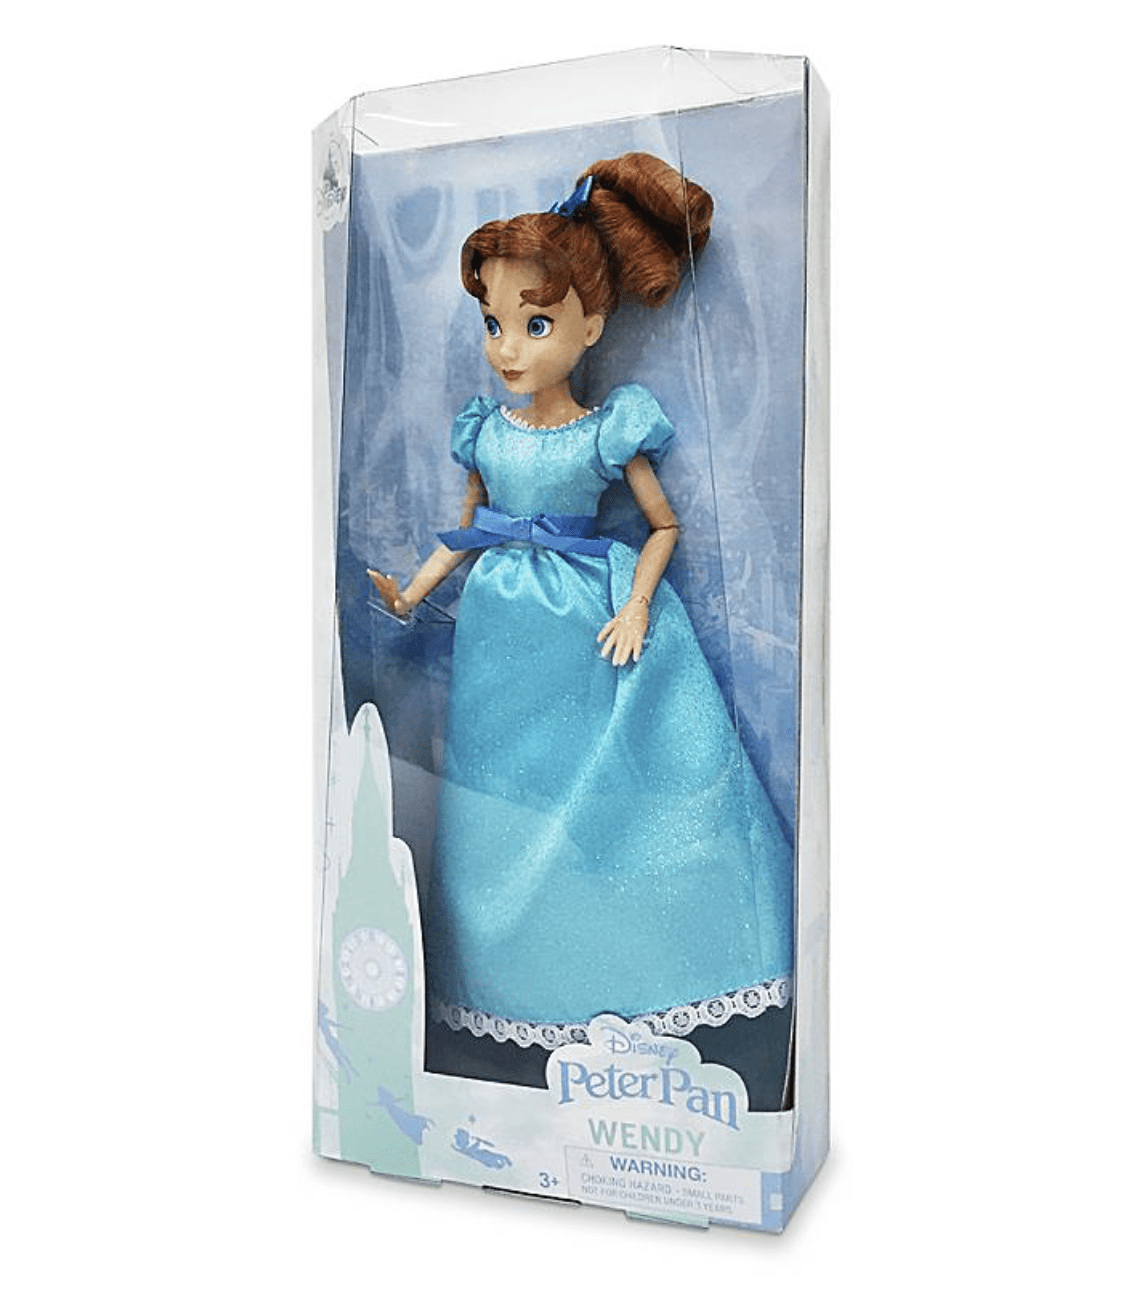 Disney Store Wendy Darling Classic Doll From Peter Pan New With Box Walmart Com